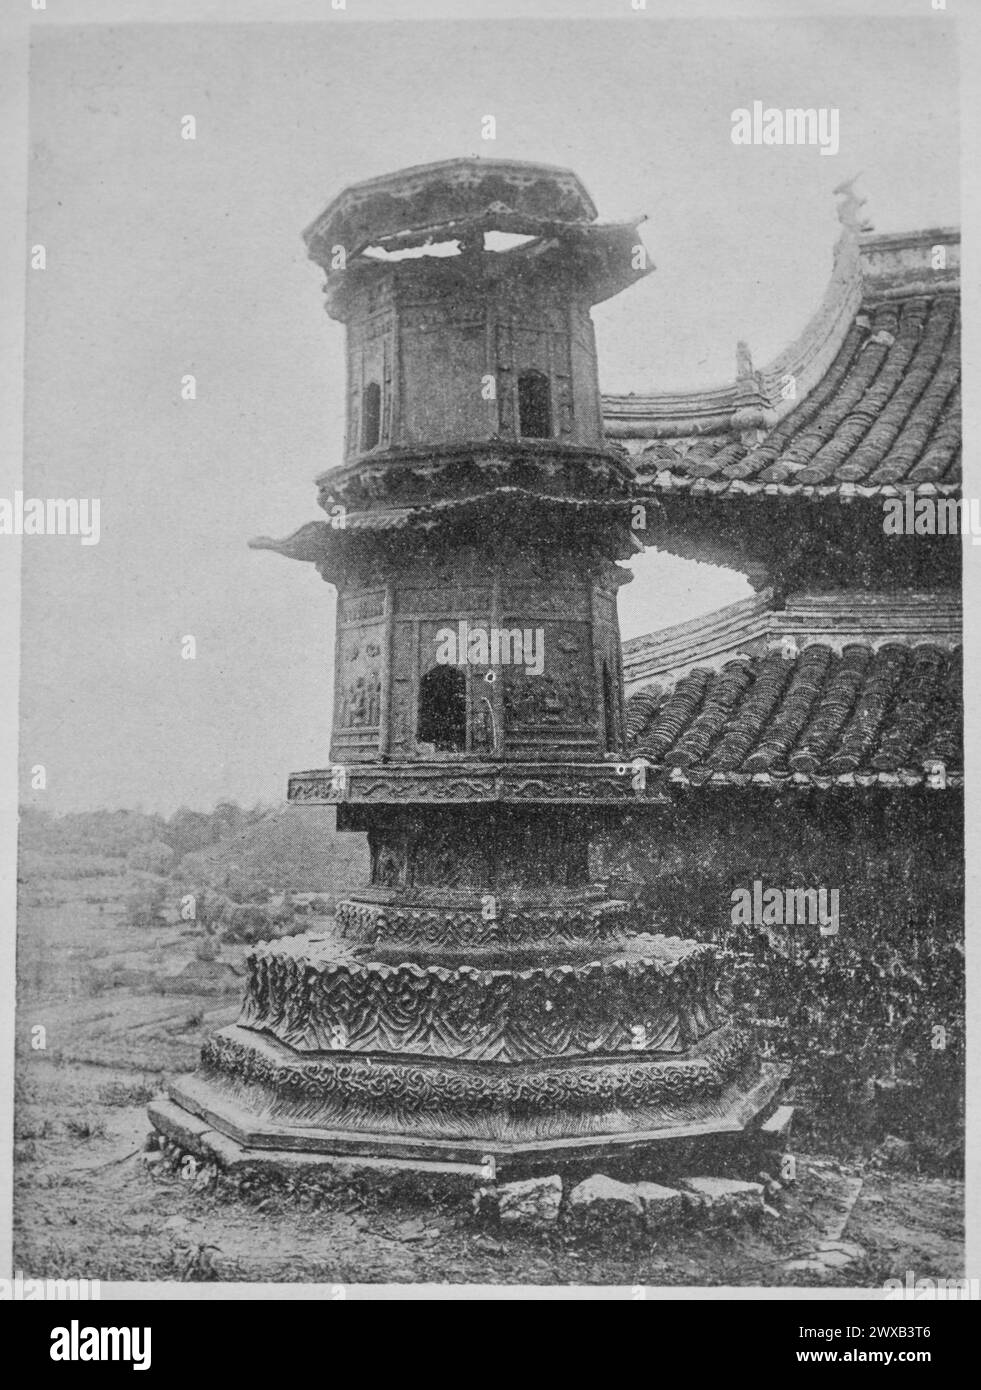 Iron Pagoda of Ganlu Temple in Zhenjiang, Jiangsu, China. The only remaining pagoda base and lower two floors cast in the Song Dynasty. Stock Photo